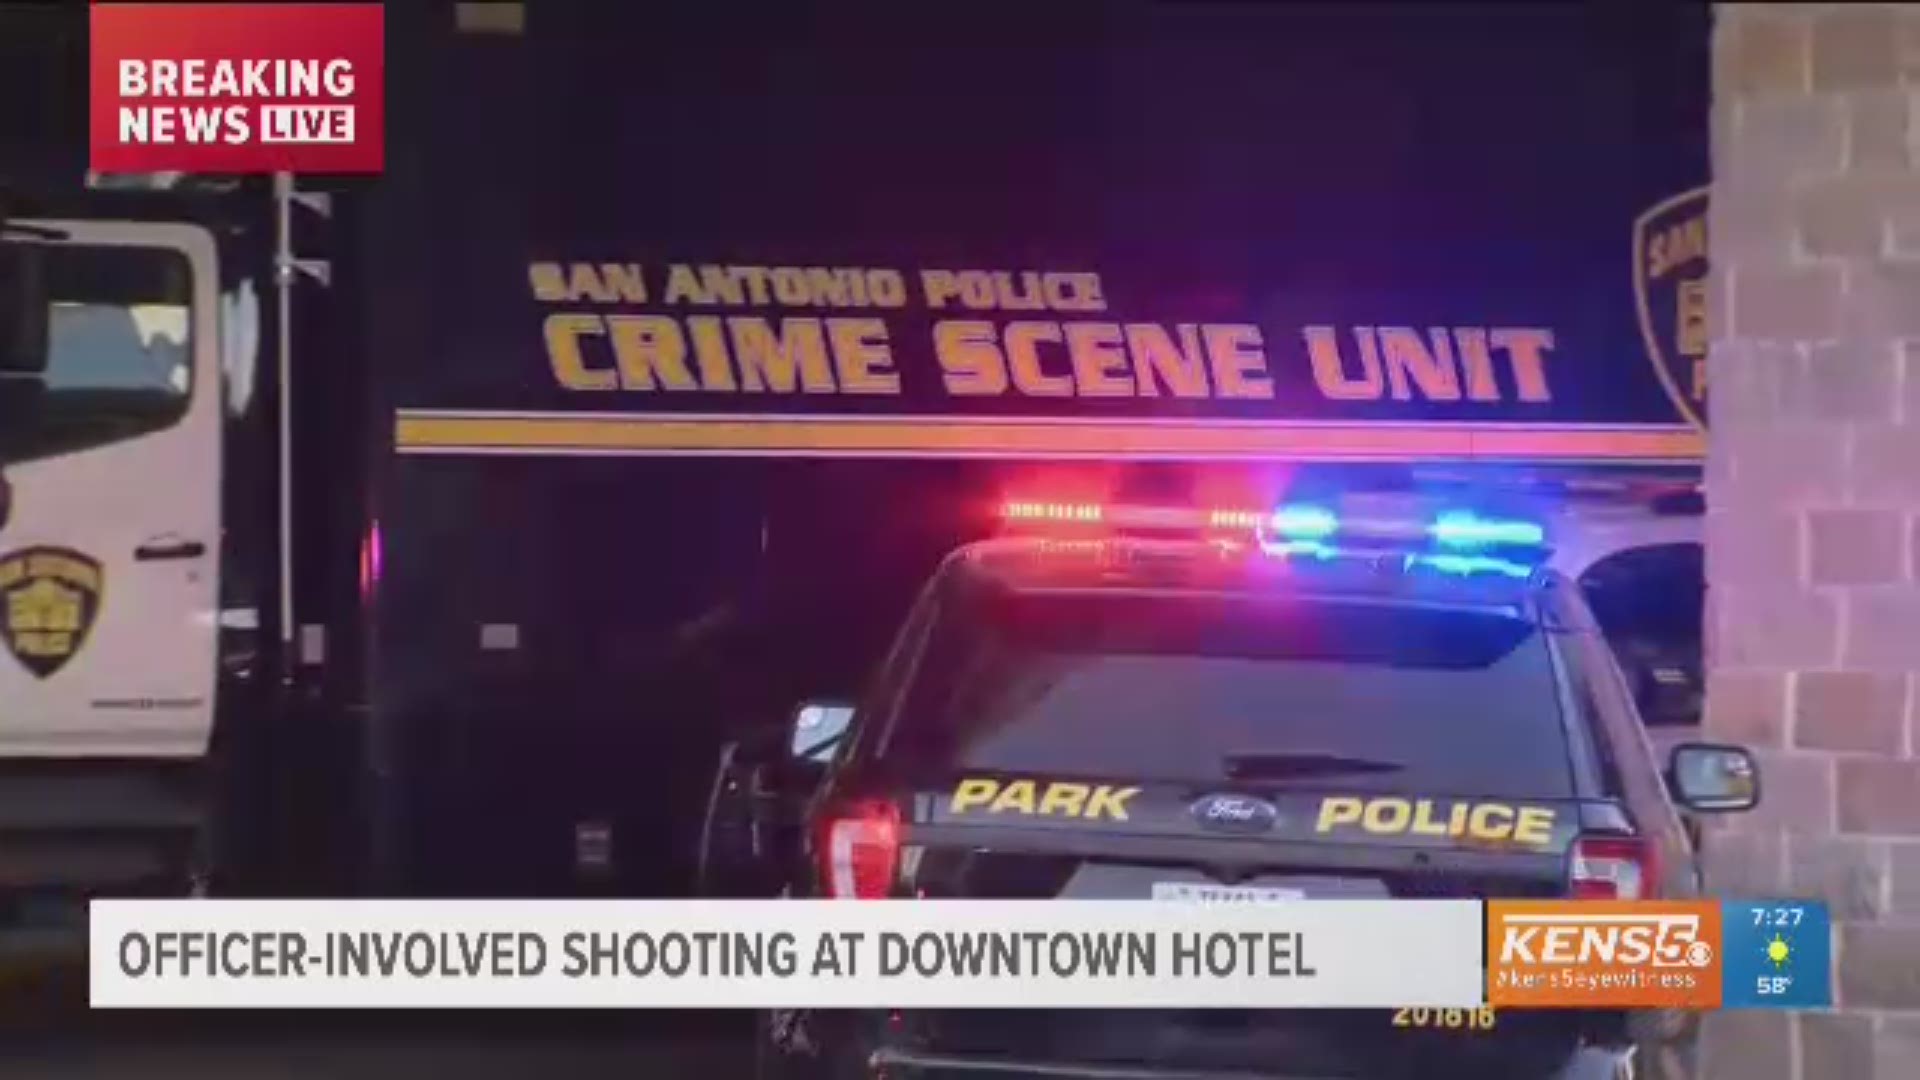 Police are reporting an officer-involved shooting in the downtown area.